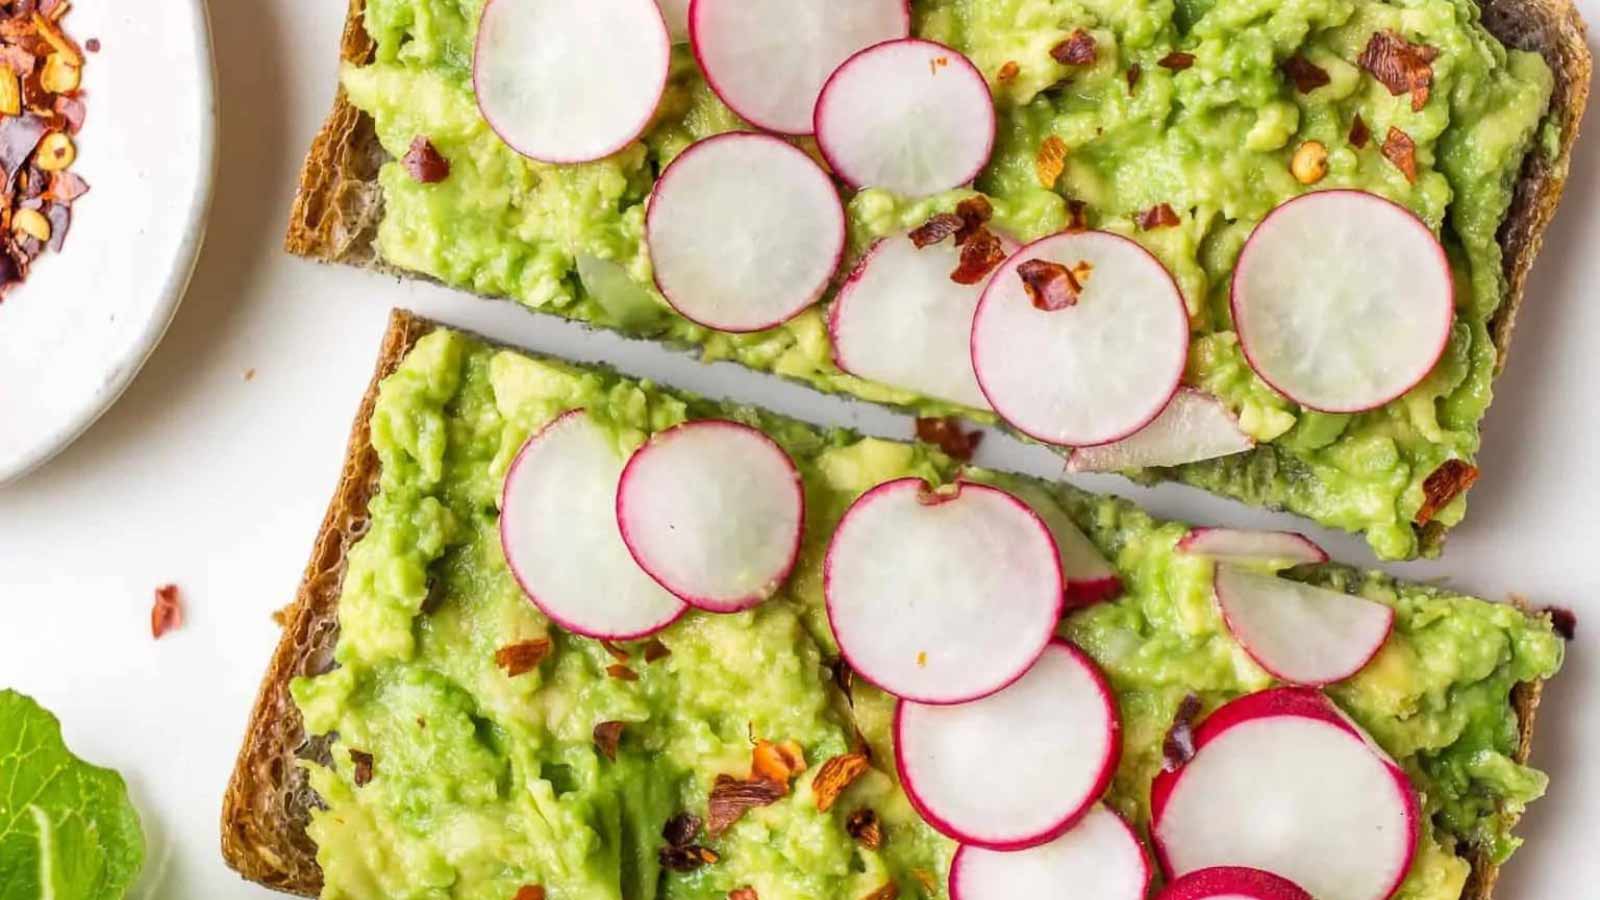 Unique Recipes For Your Extra Bunch Of Radishes